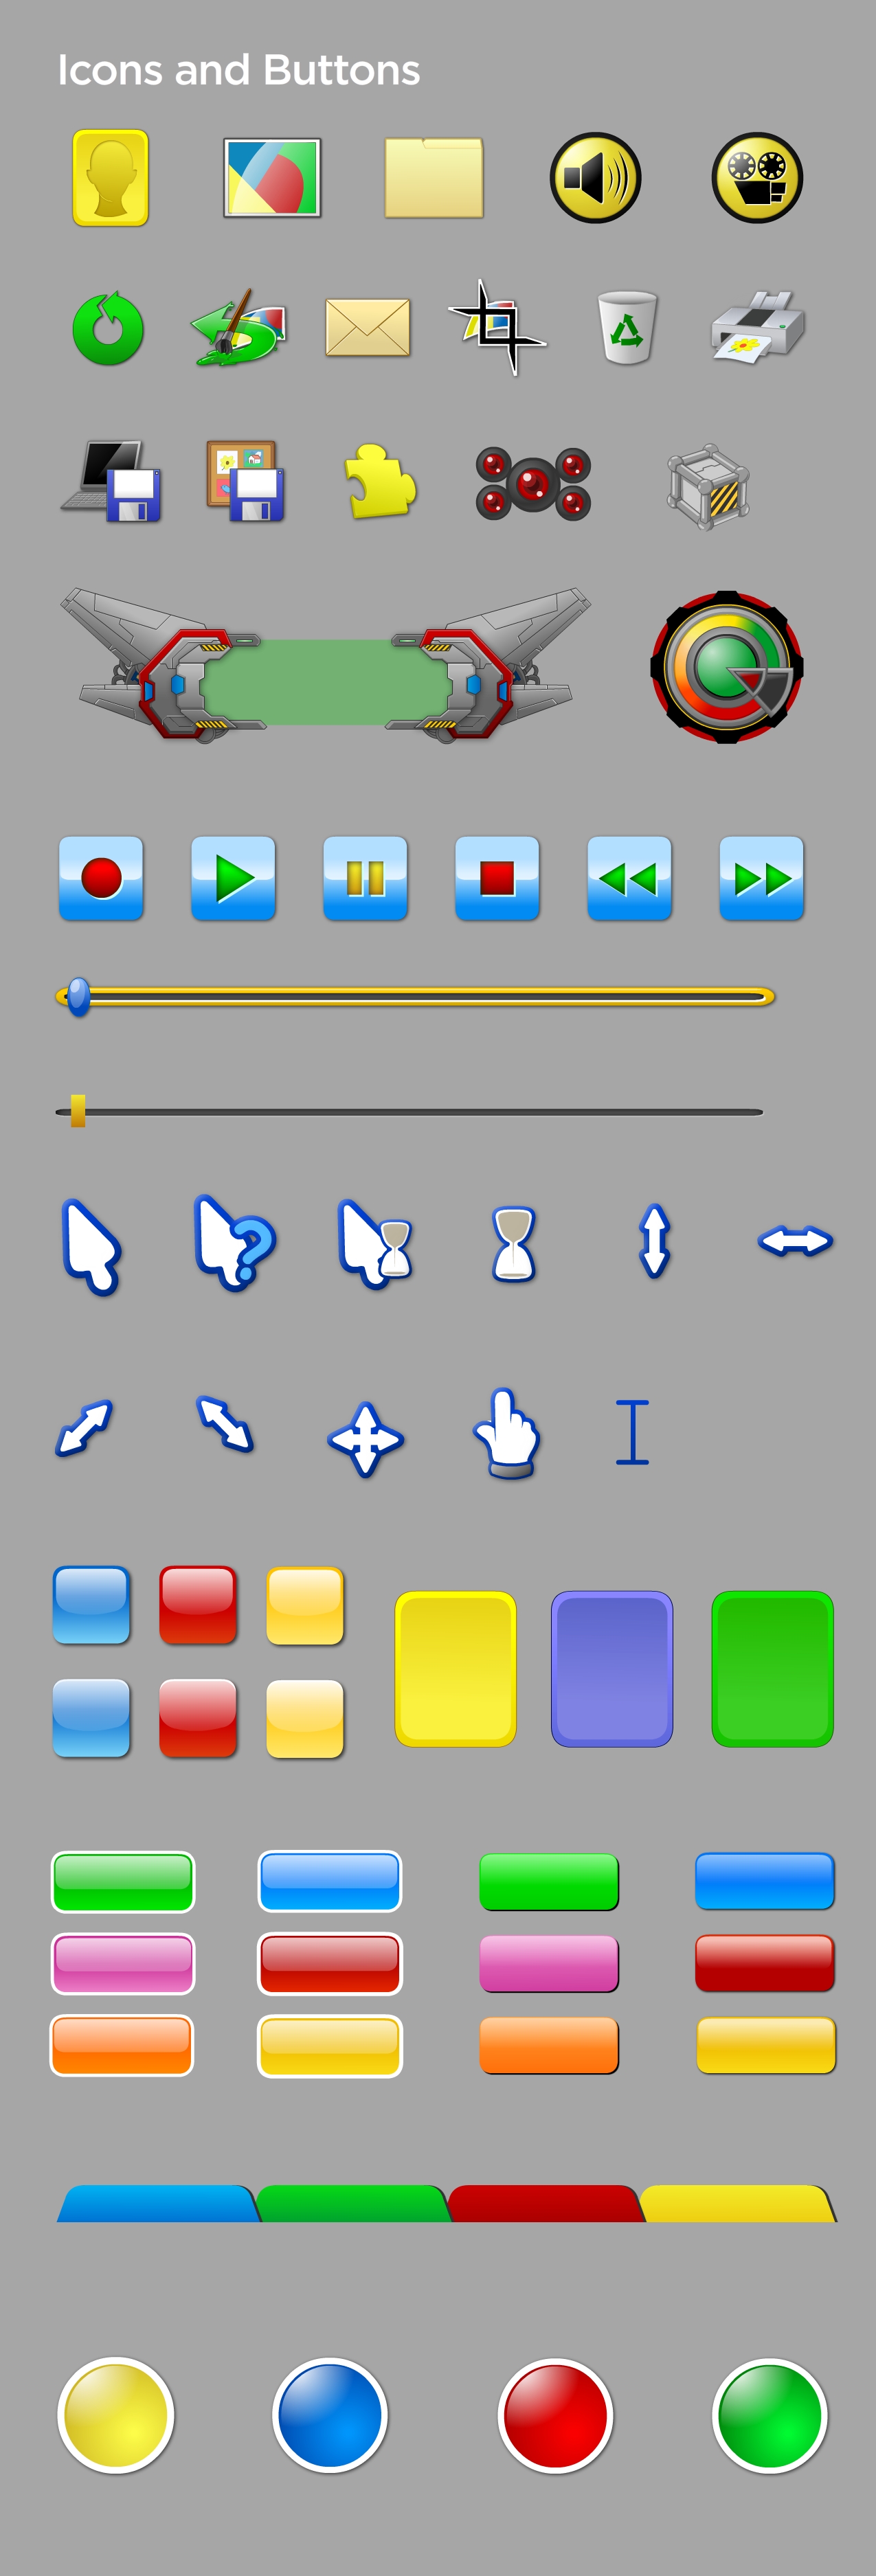 Random Icons and Buttons